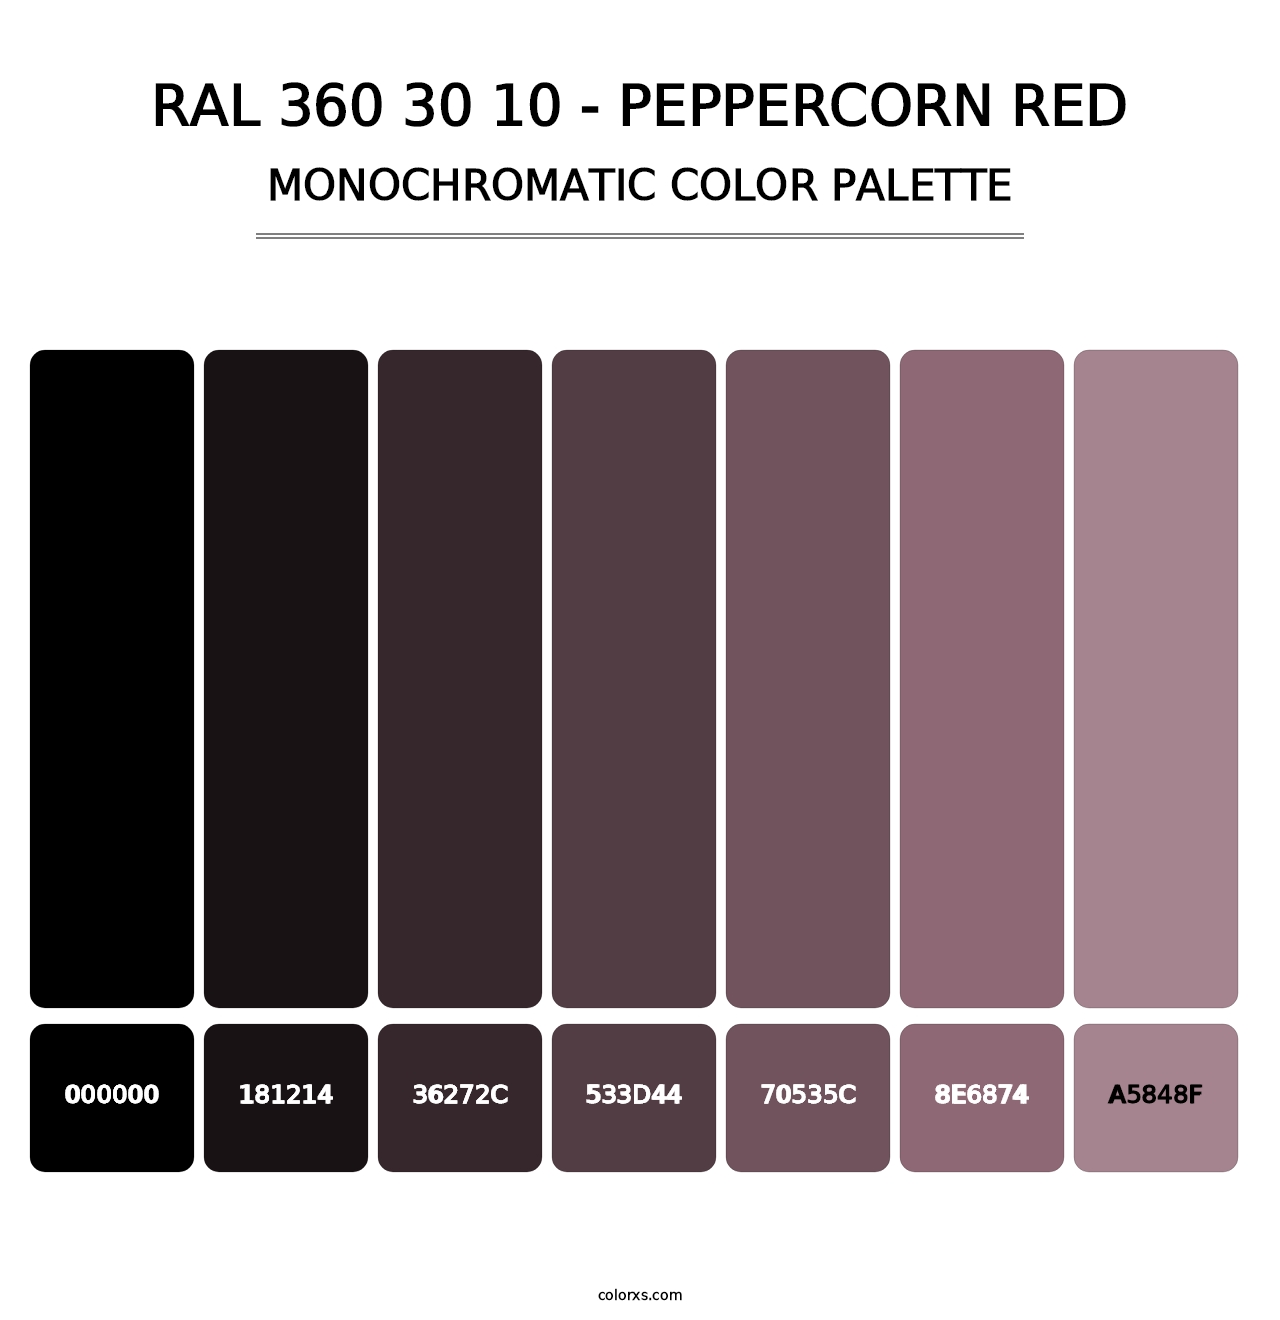 RAL 360 30 10 - Peppercorn Red - Monochromatic Color Palette